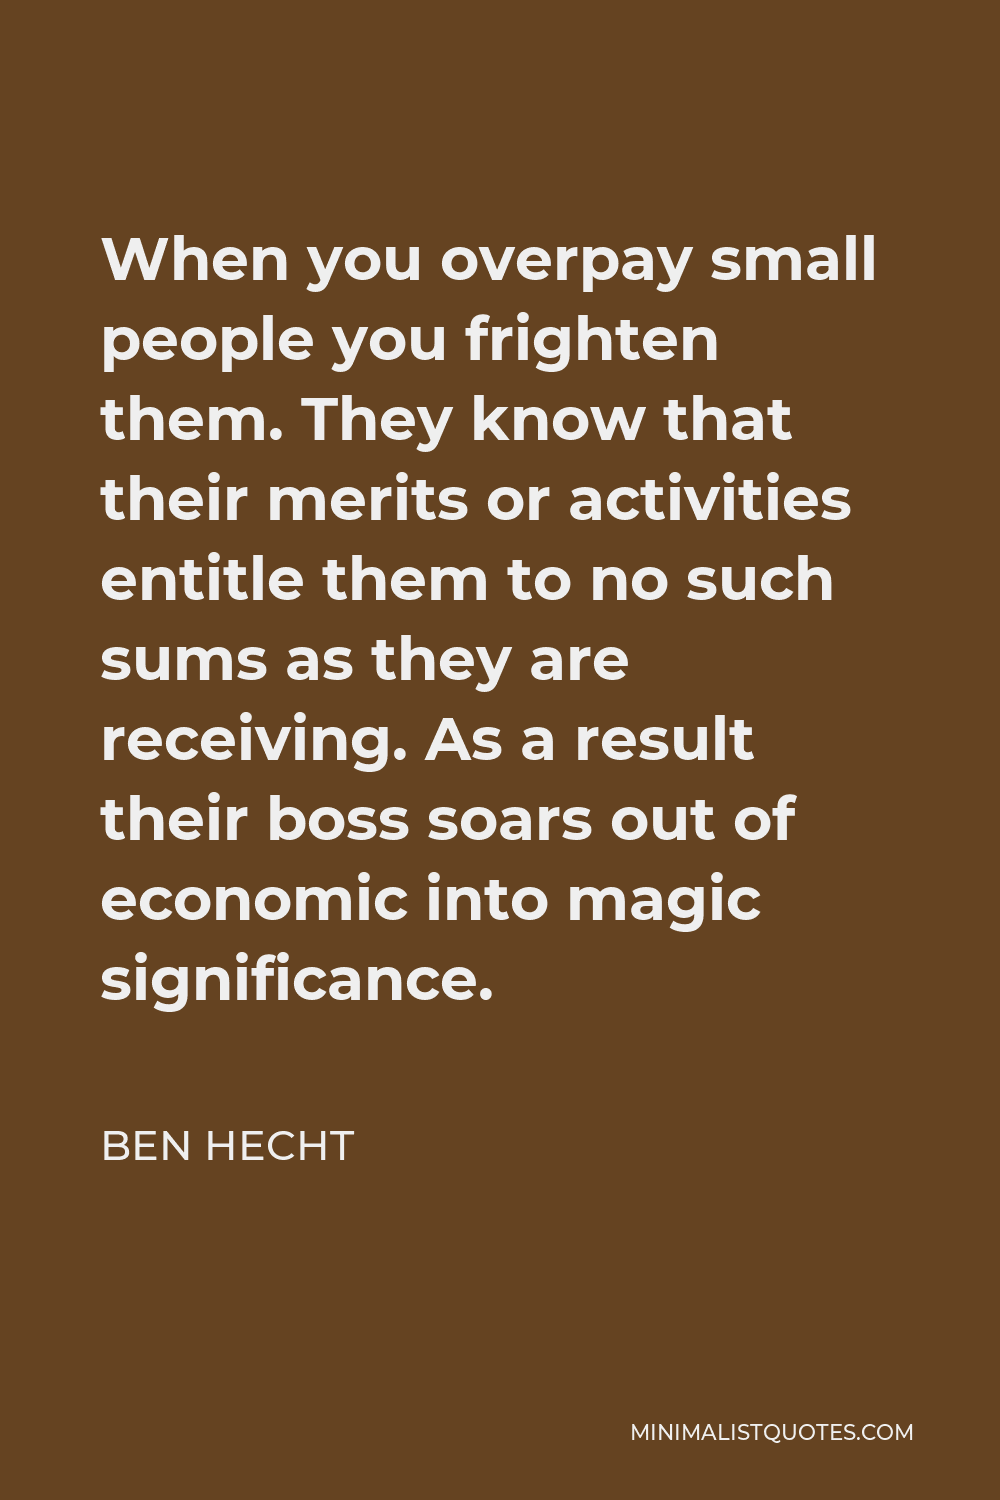 Ben Hecht Quote - When you overpay small people you frighten them. They know that their merits or activities entitle them to no such sums as they are receiving. As a result their boss soars out of economic into magic significance.